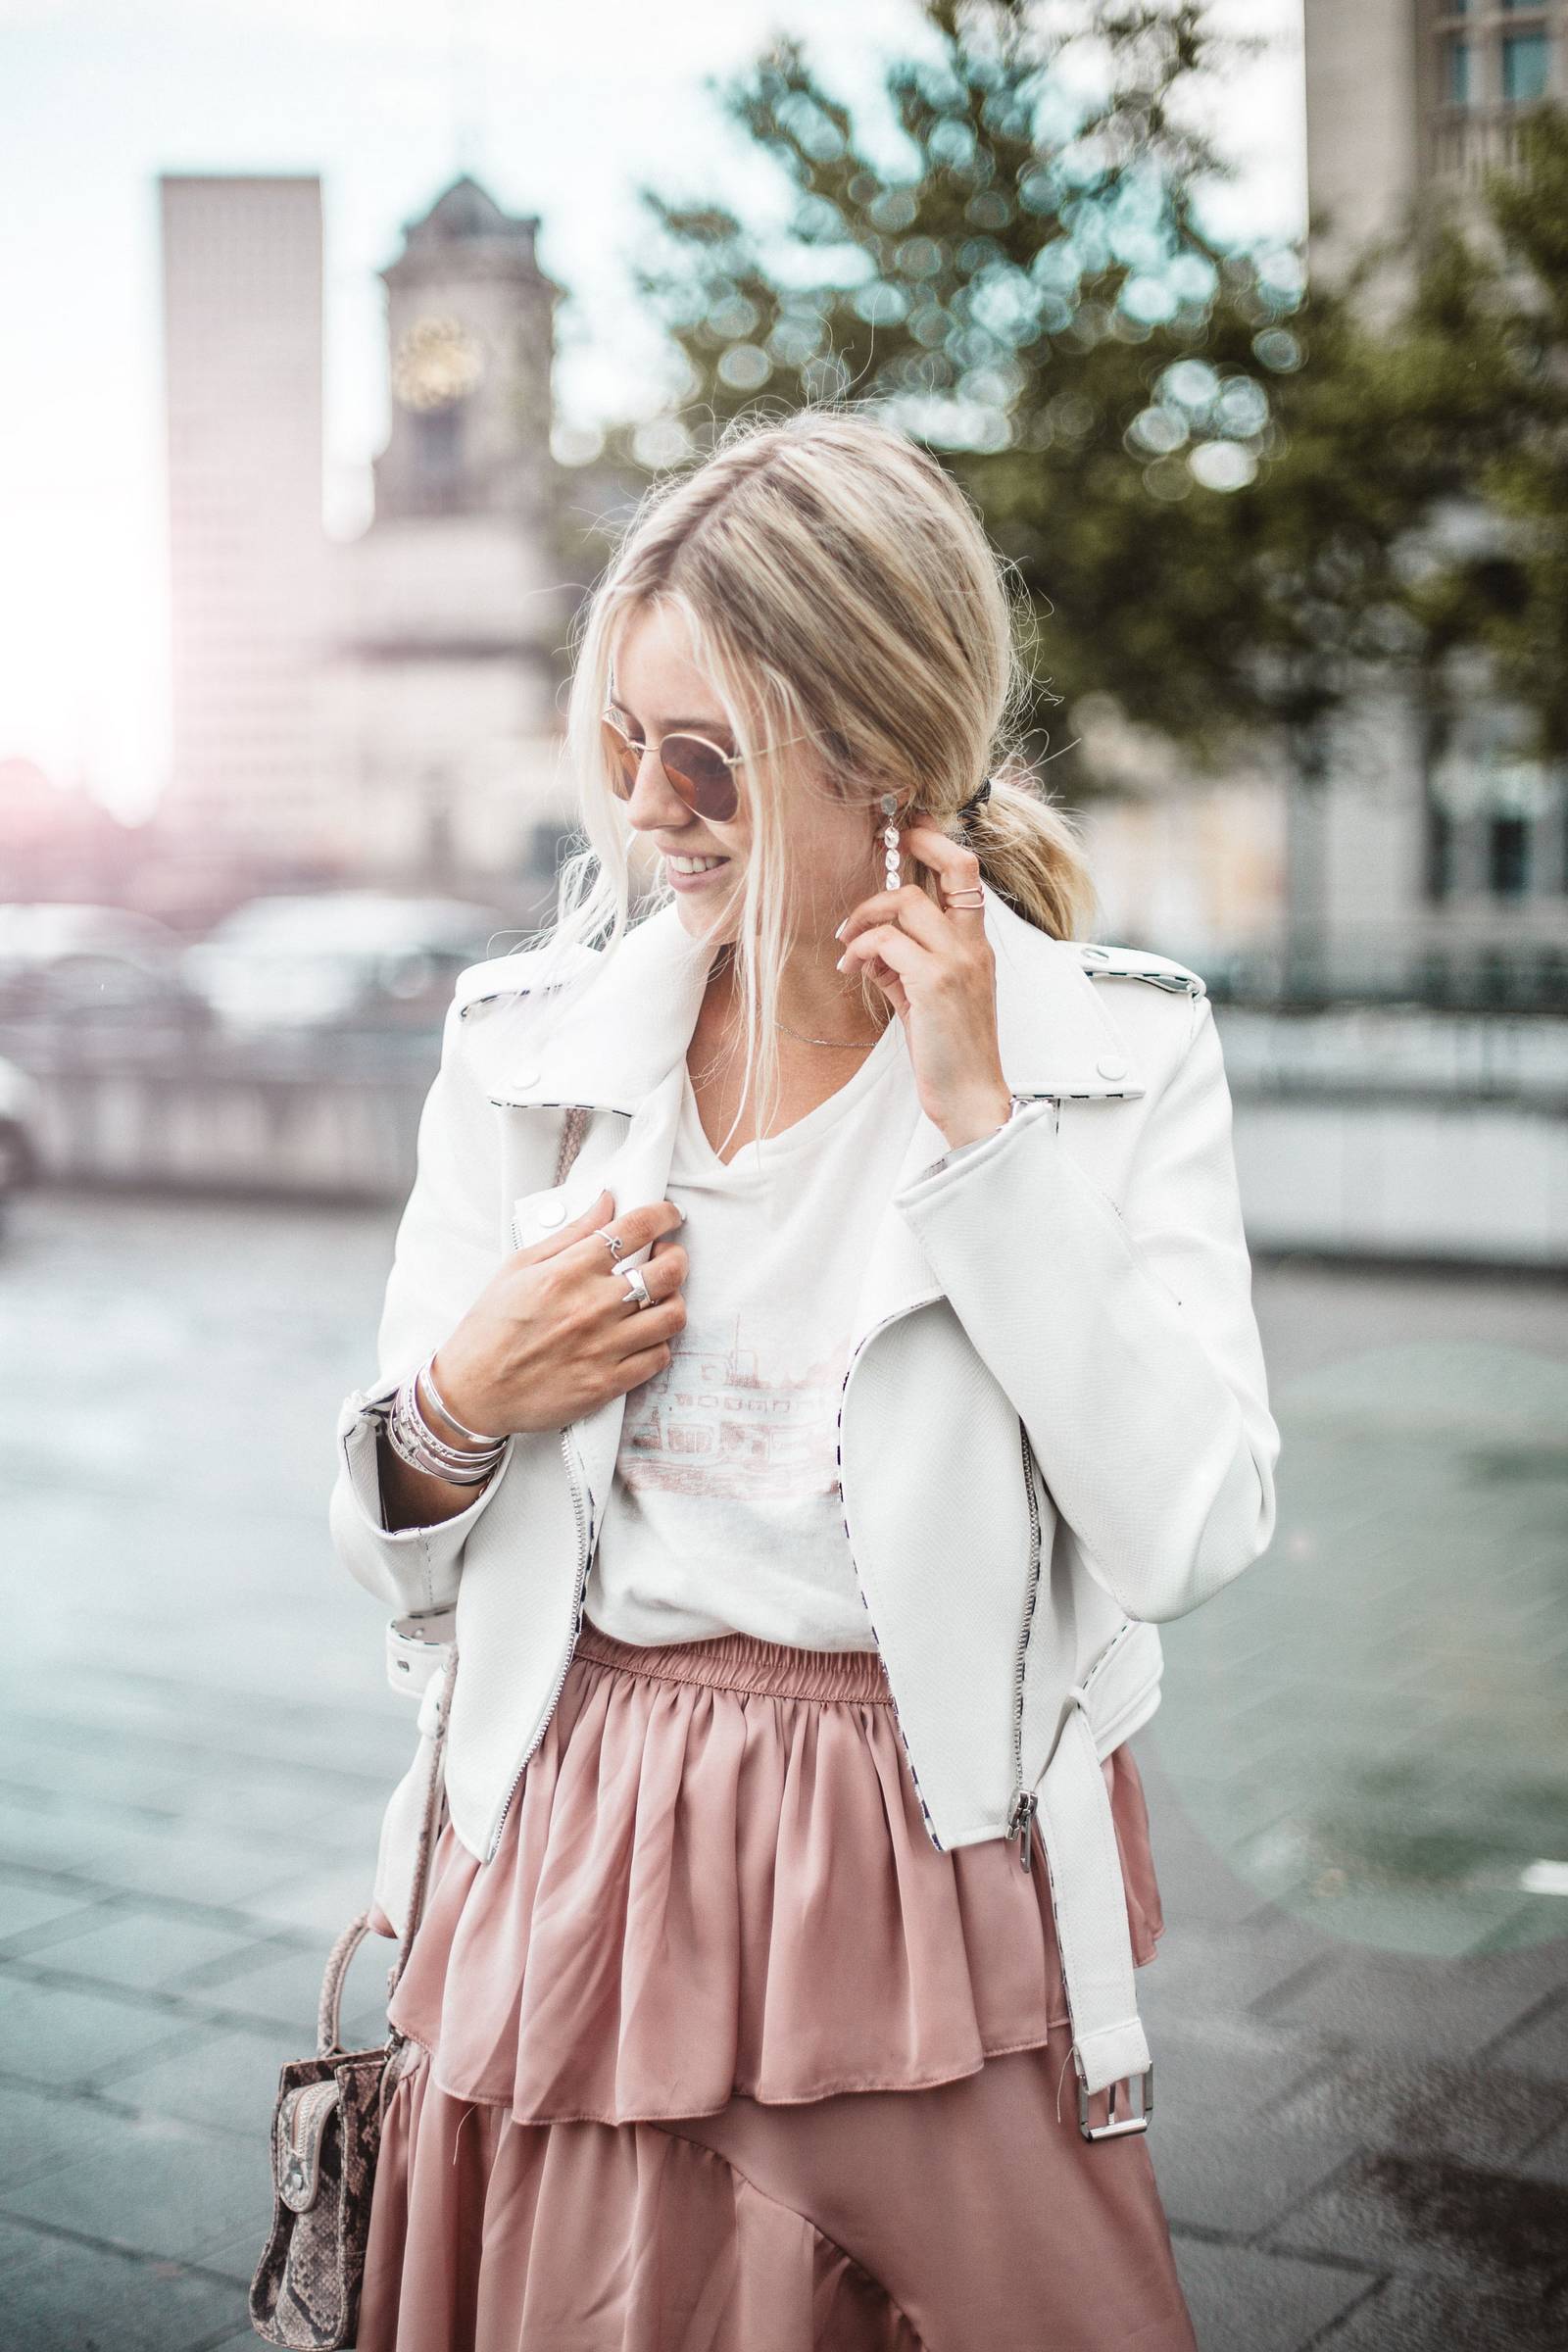 Asymetric skirt and white leather jacket